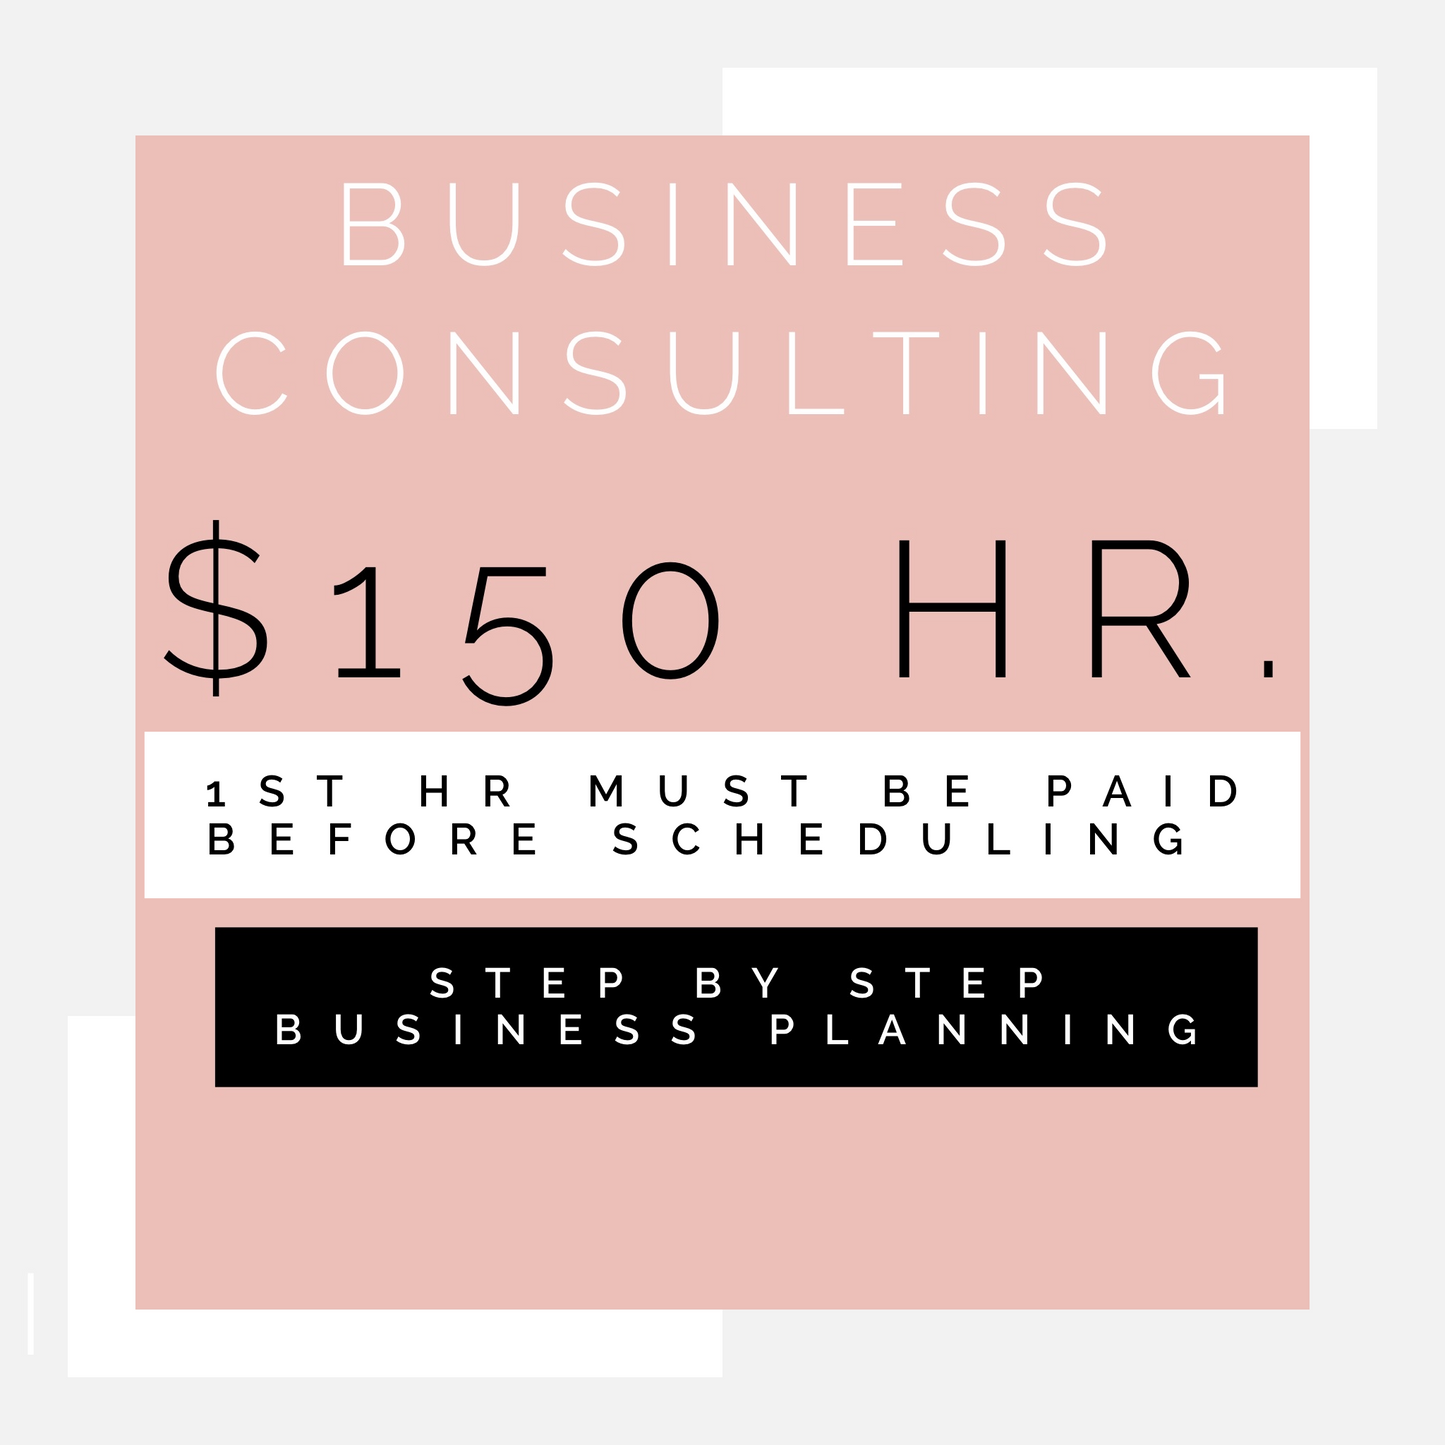 BUSINESS CONSULTING